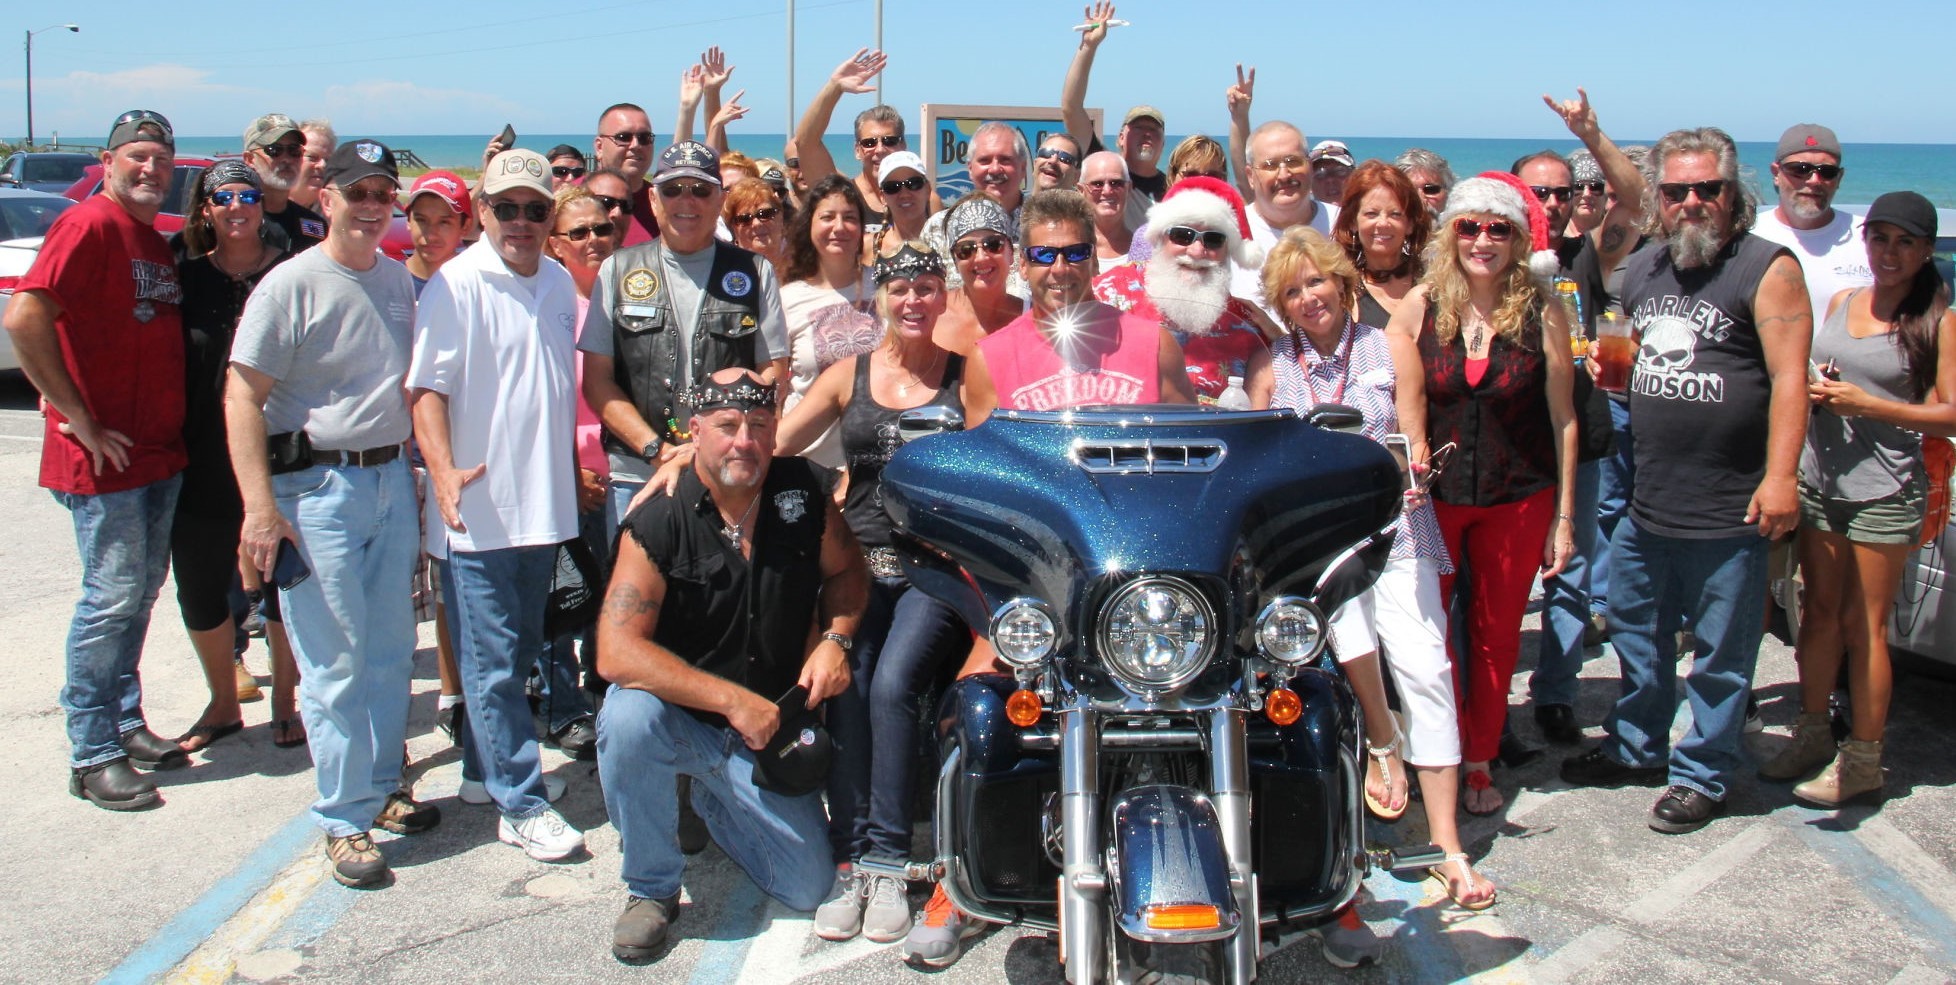 The Rotary Club of Palm Coast's annual charity poker run benefits Christmas Come True. Photo courtesy of Rotary Club of Palm Coast